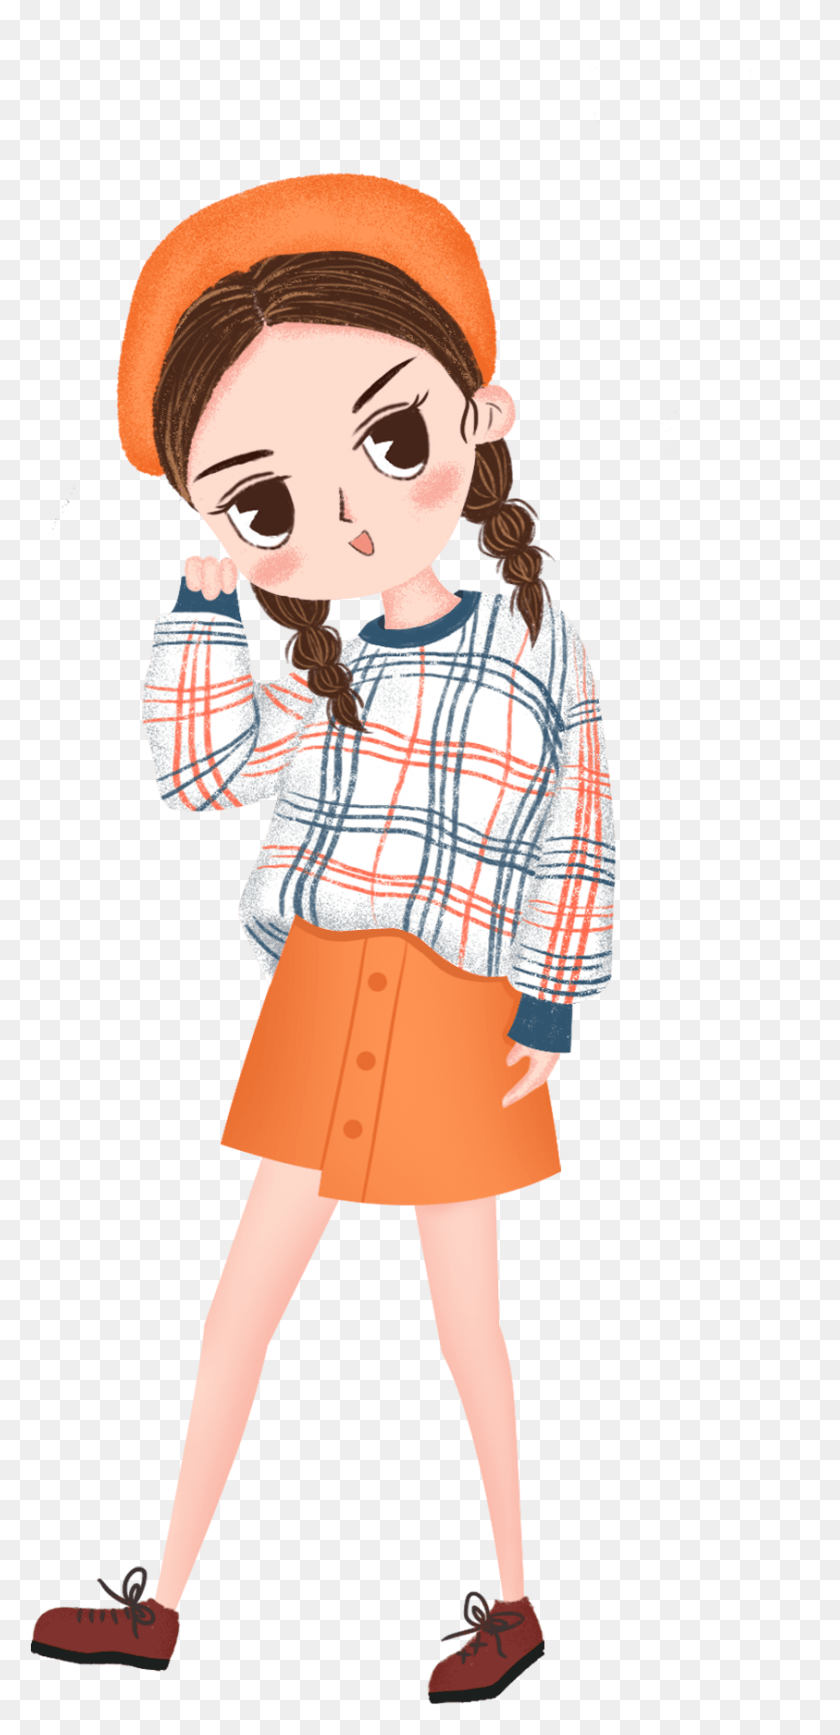 843x1811 Cute Little Girl Smiling Young Lady Hand Painted Illustration Cartoon, Clothing, Apparel, Female Descargar Hd Png